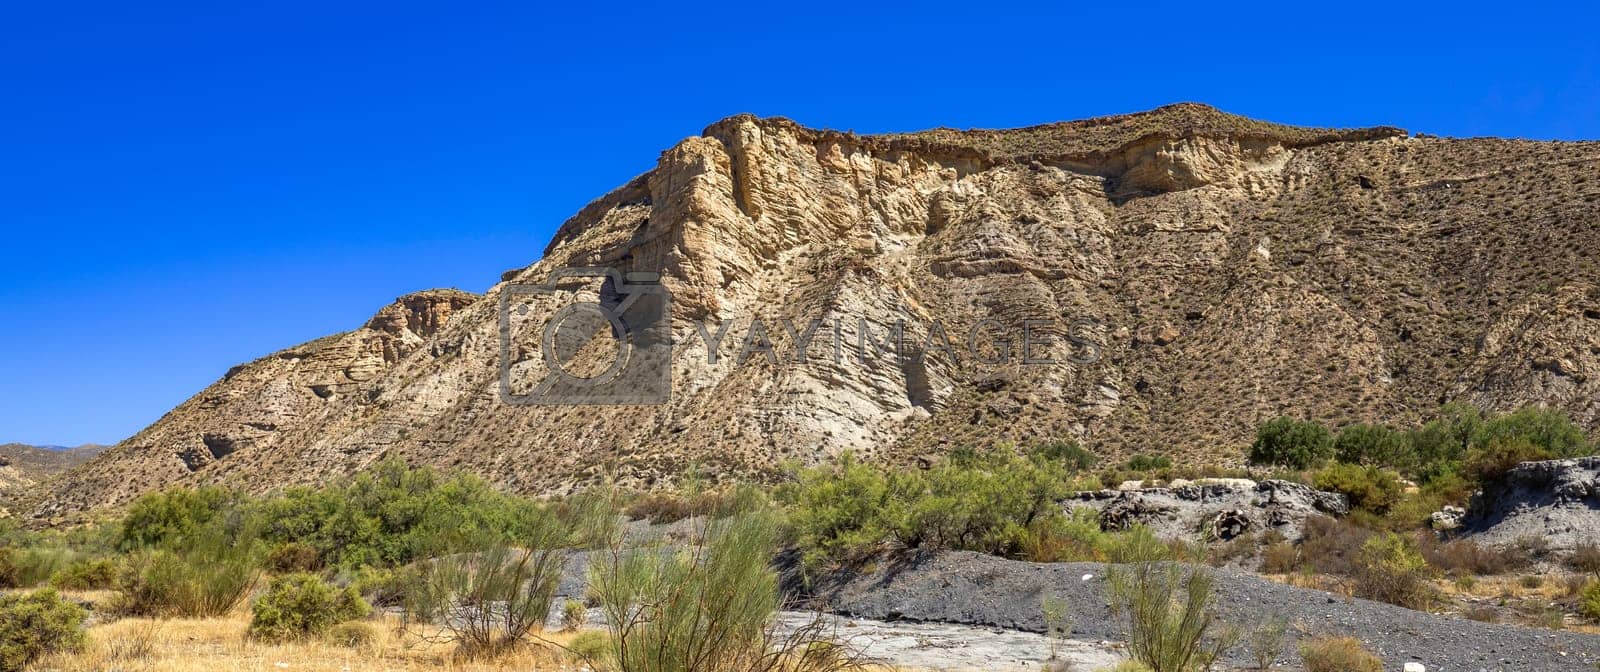 Royalty free image of Tabernas Desert Nature Reserve, Almería, Spain by alcaproac